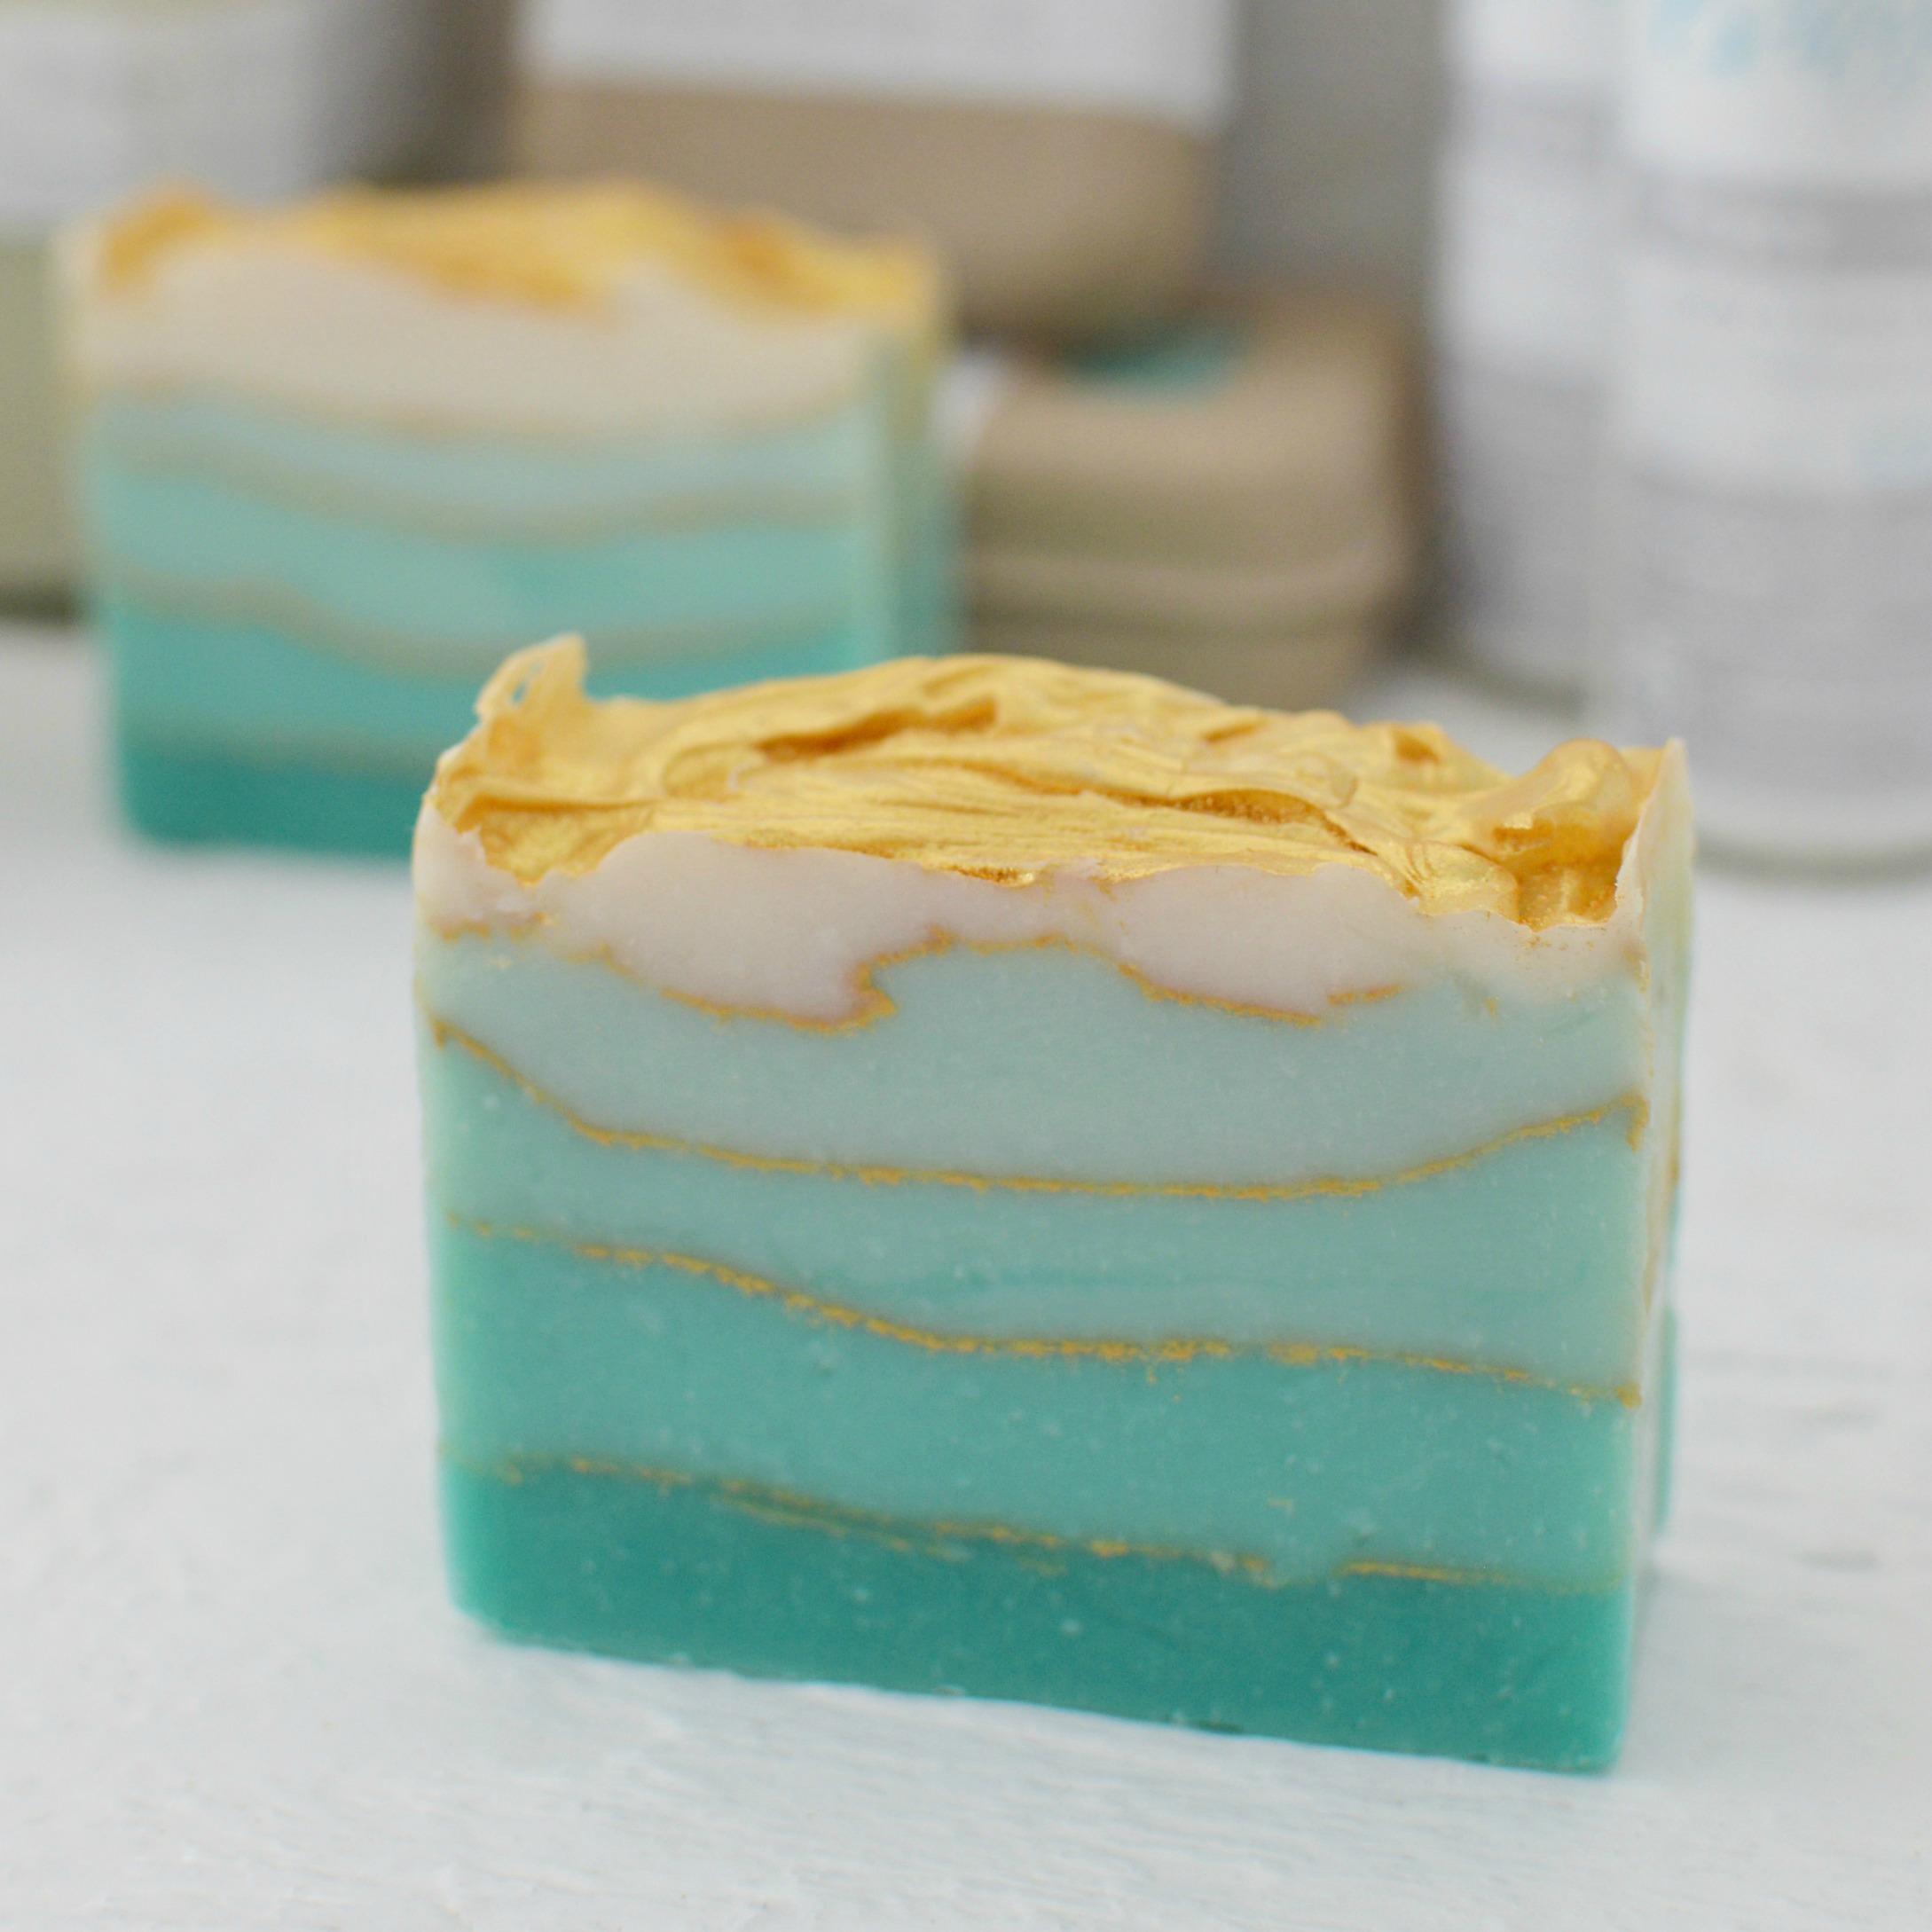 Introducing Foxy Body and Home Fragrance by foxhollowcottage.com - Artisanal small batch soap. Aqua ombre topped with golden sunshine.